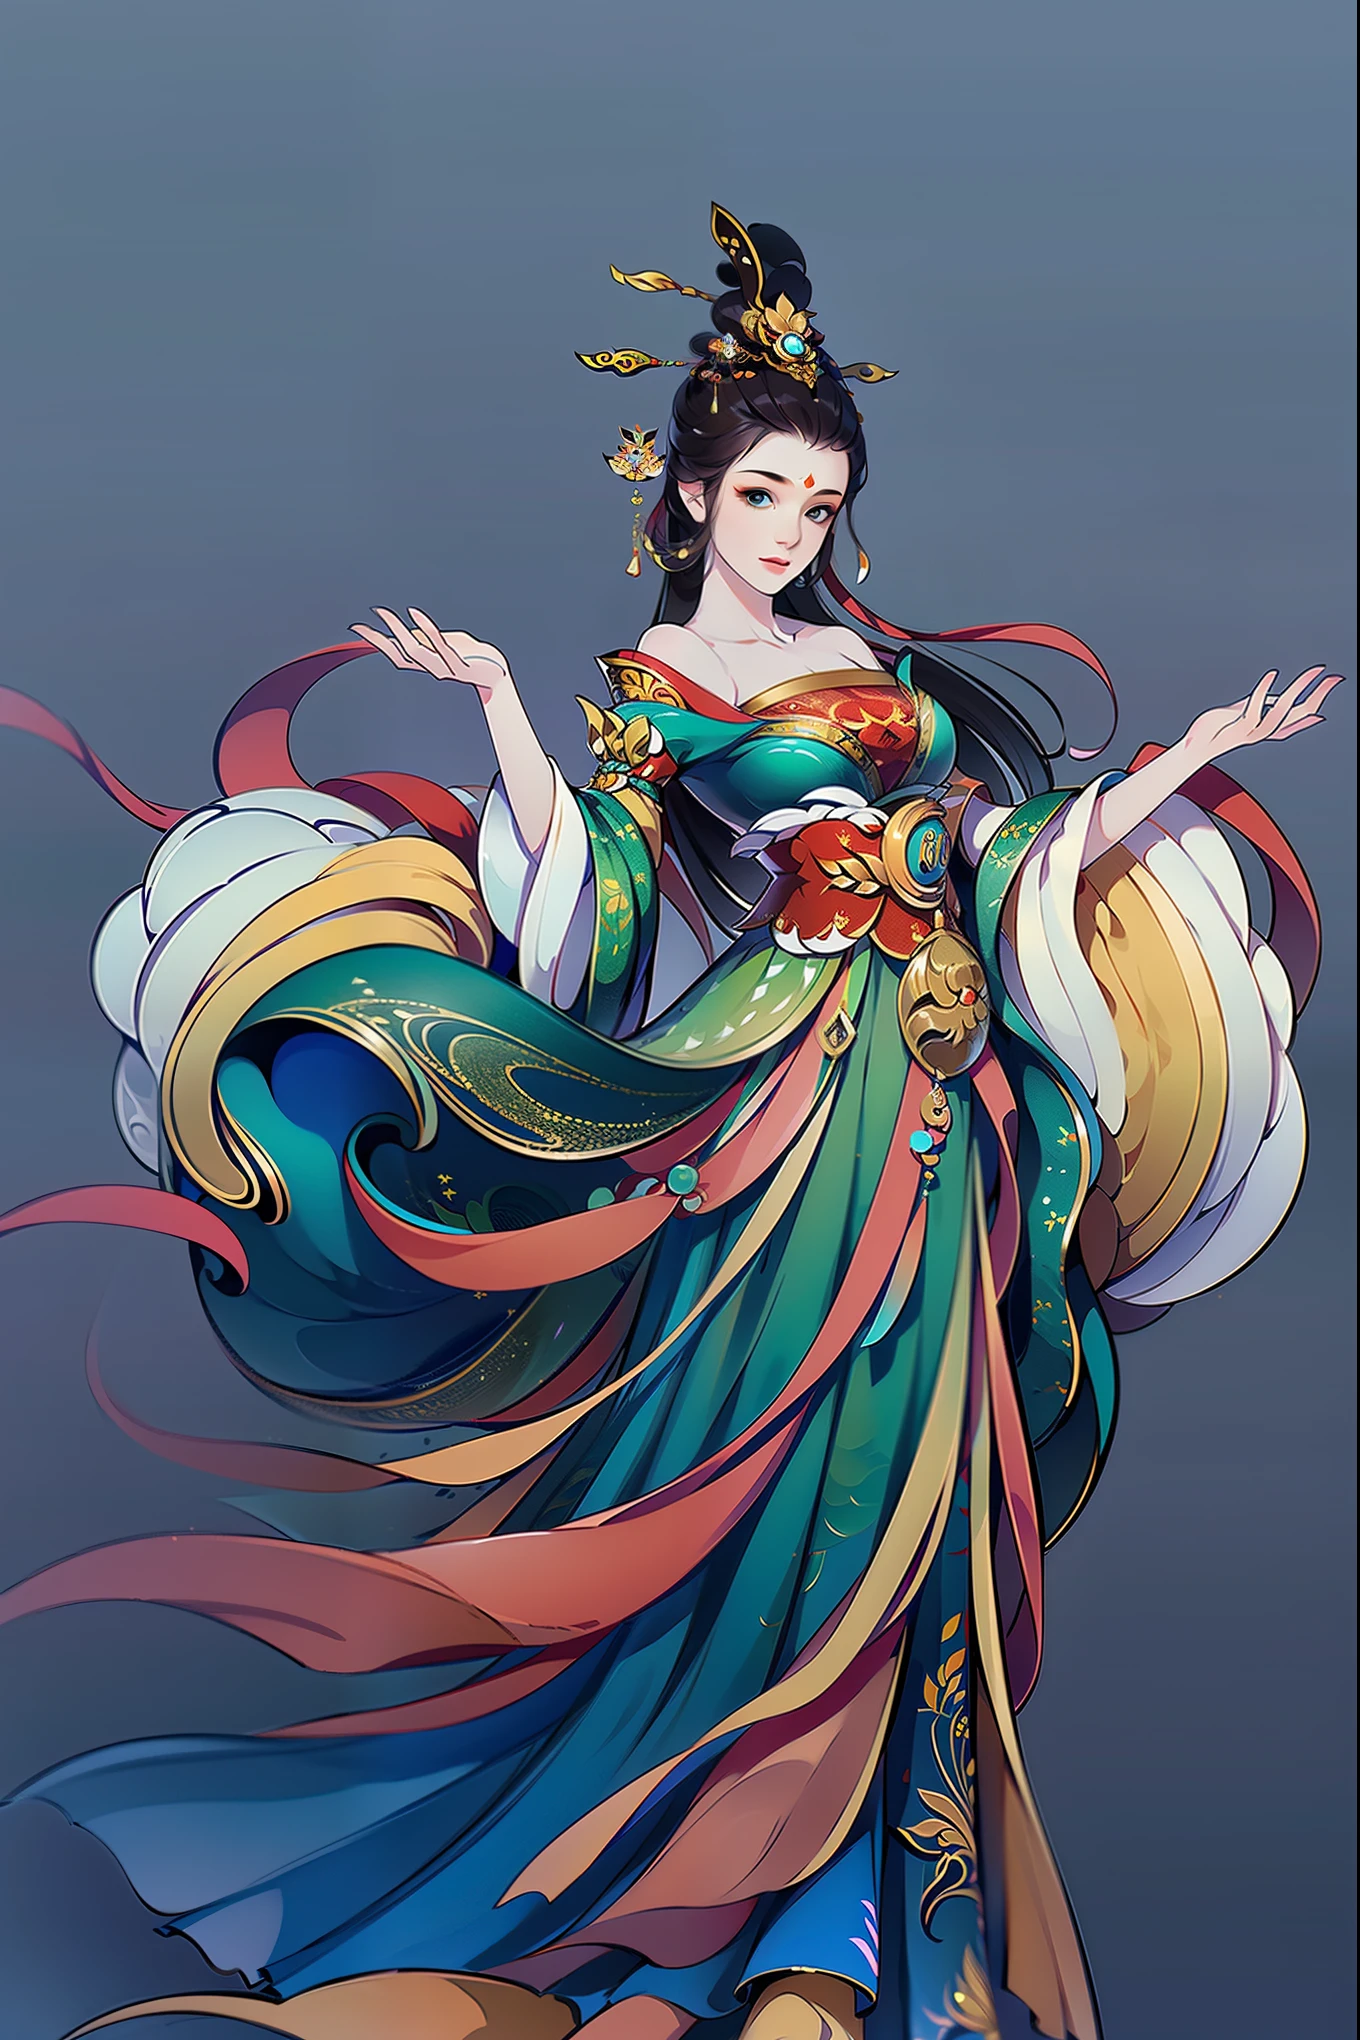 （masterpiece，super detailed，HD details，highly detailed art）1 girl，Half body，xianxia，Gorgeous dance costumes，elegant，Elegant，Highly detailed character designs from East Asia，Game character costume design，simple，ultra high resolution, sharp focus, epic work, masterpiece, (Very detailed CG unified 8k wallpaper)，pretty face，beautiful eyes，HD details